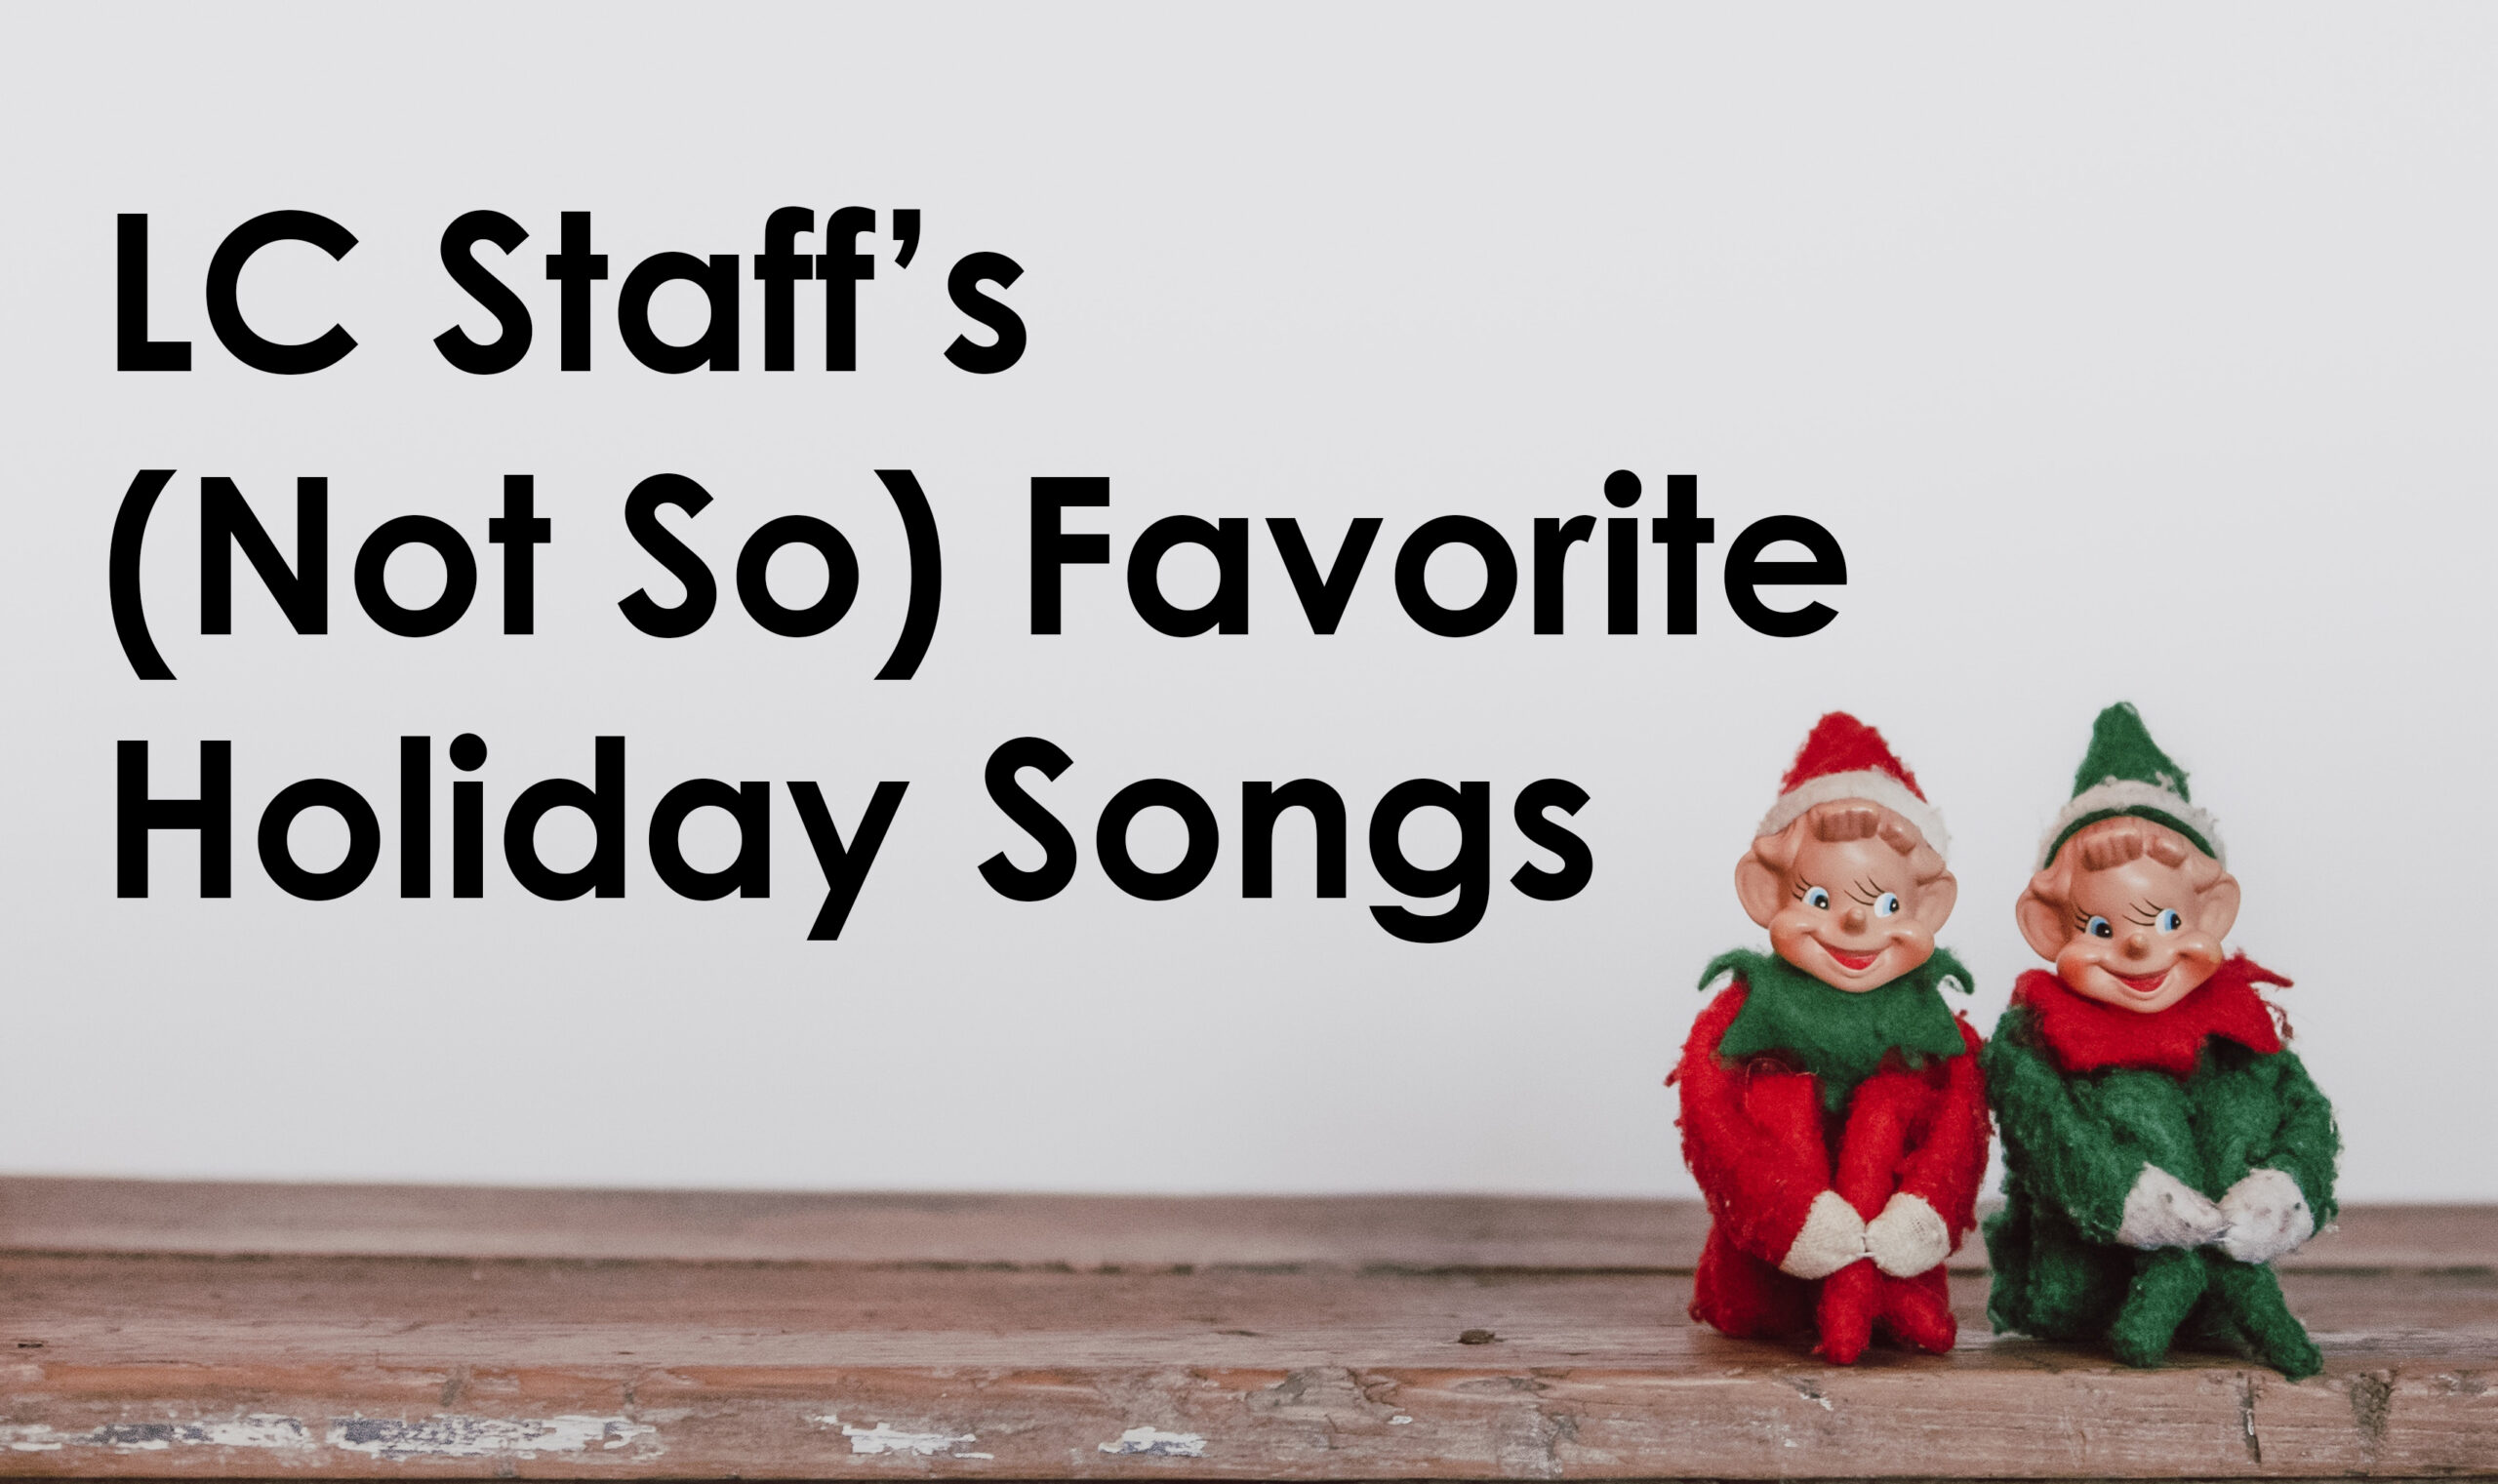 Two toy elevs sitting on a shelf with the words "LC Staff's (Not So) Favorite Holiday Songs."